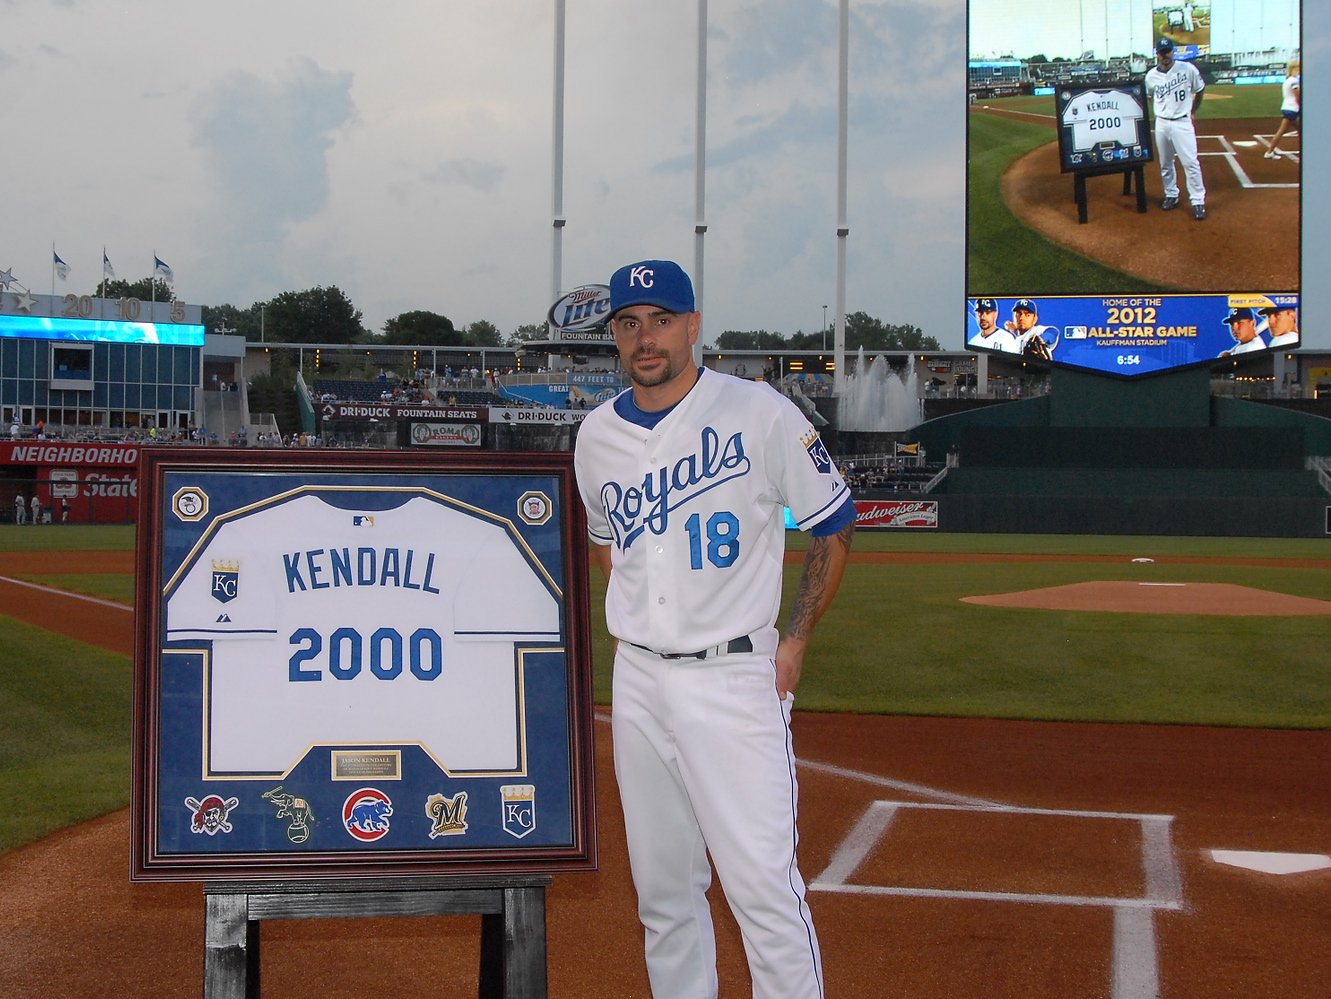 Happy Birthday to former Kansas City Royals player Jason Kendall(2010) who turns 44 today! 